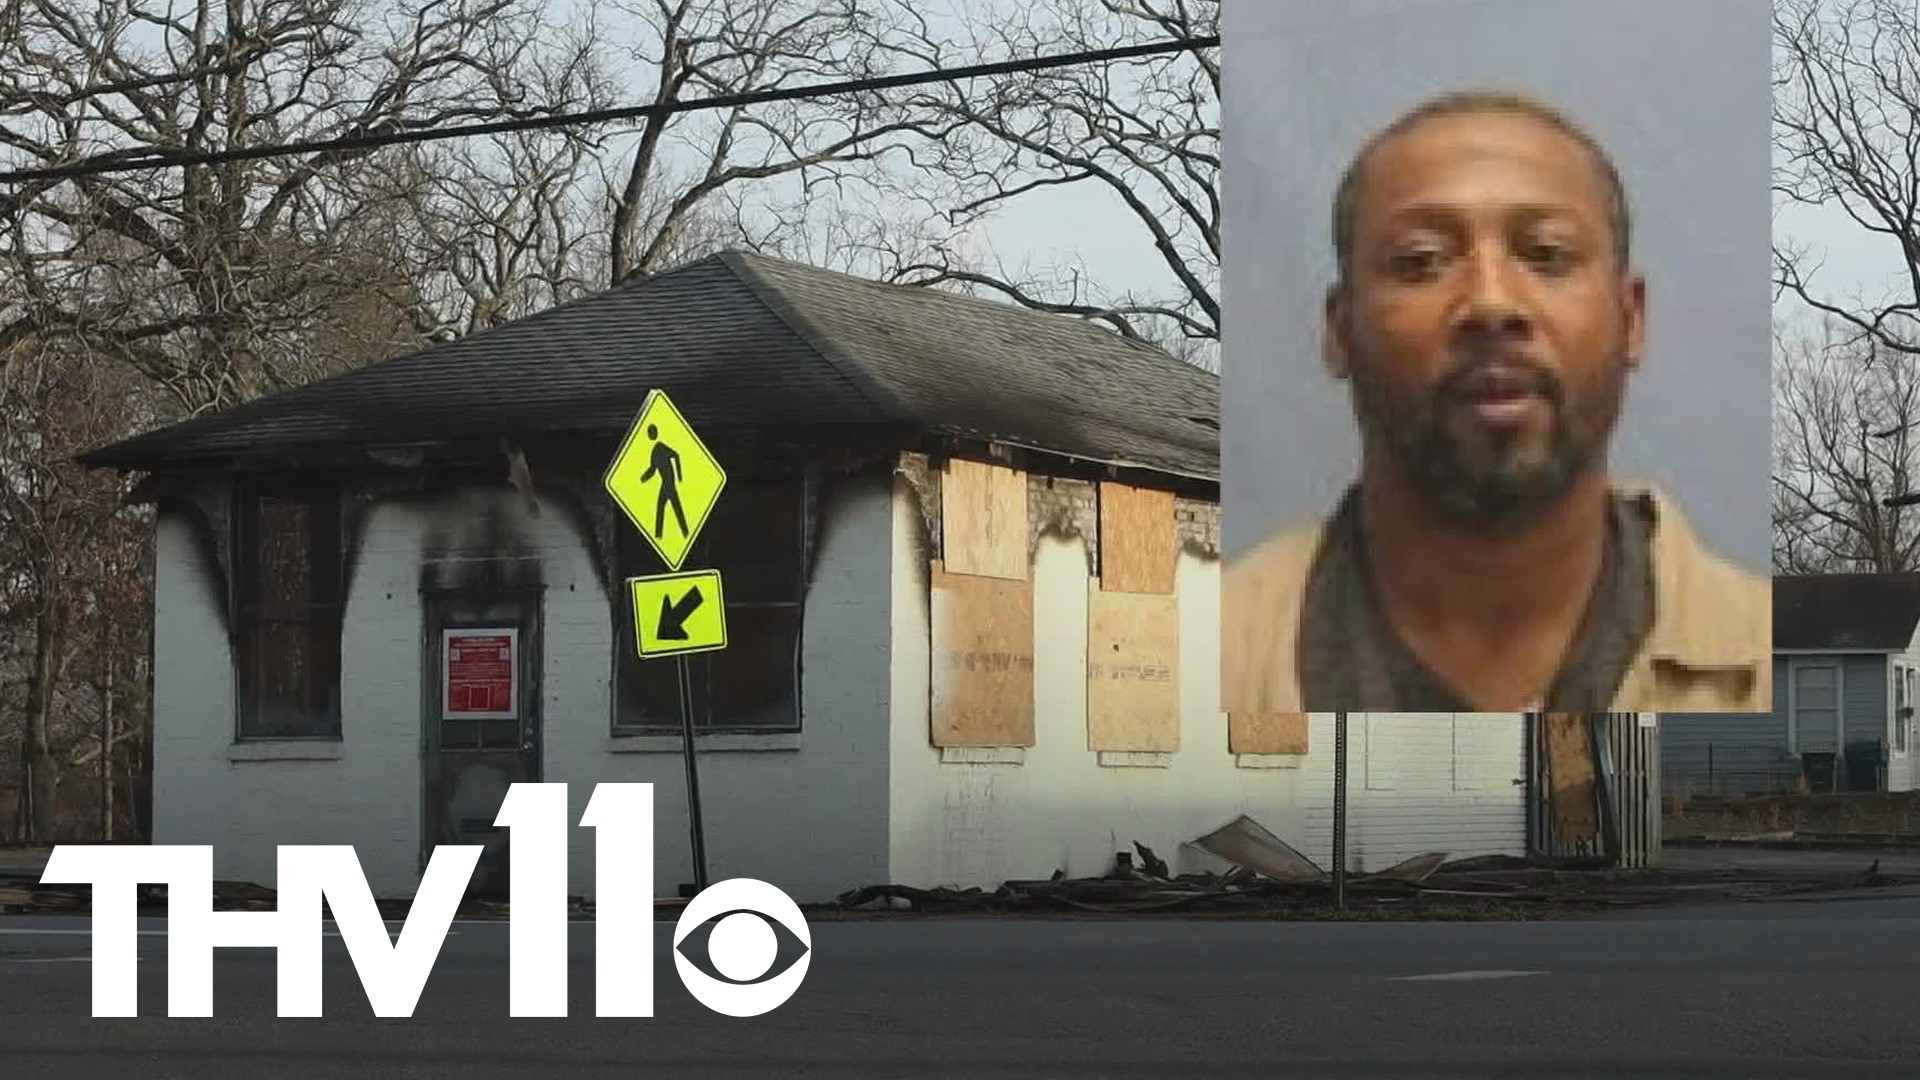 The ex-boyfriend of a Little Rock coffee shop owner has been charged with arson in connection to fires at two locations.